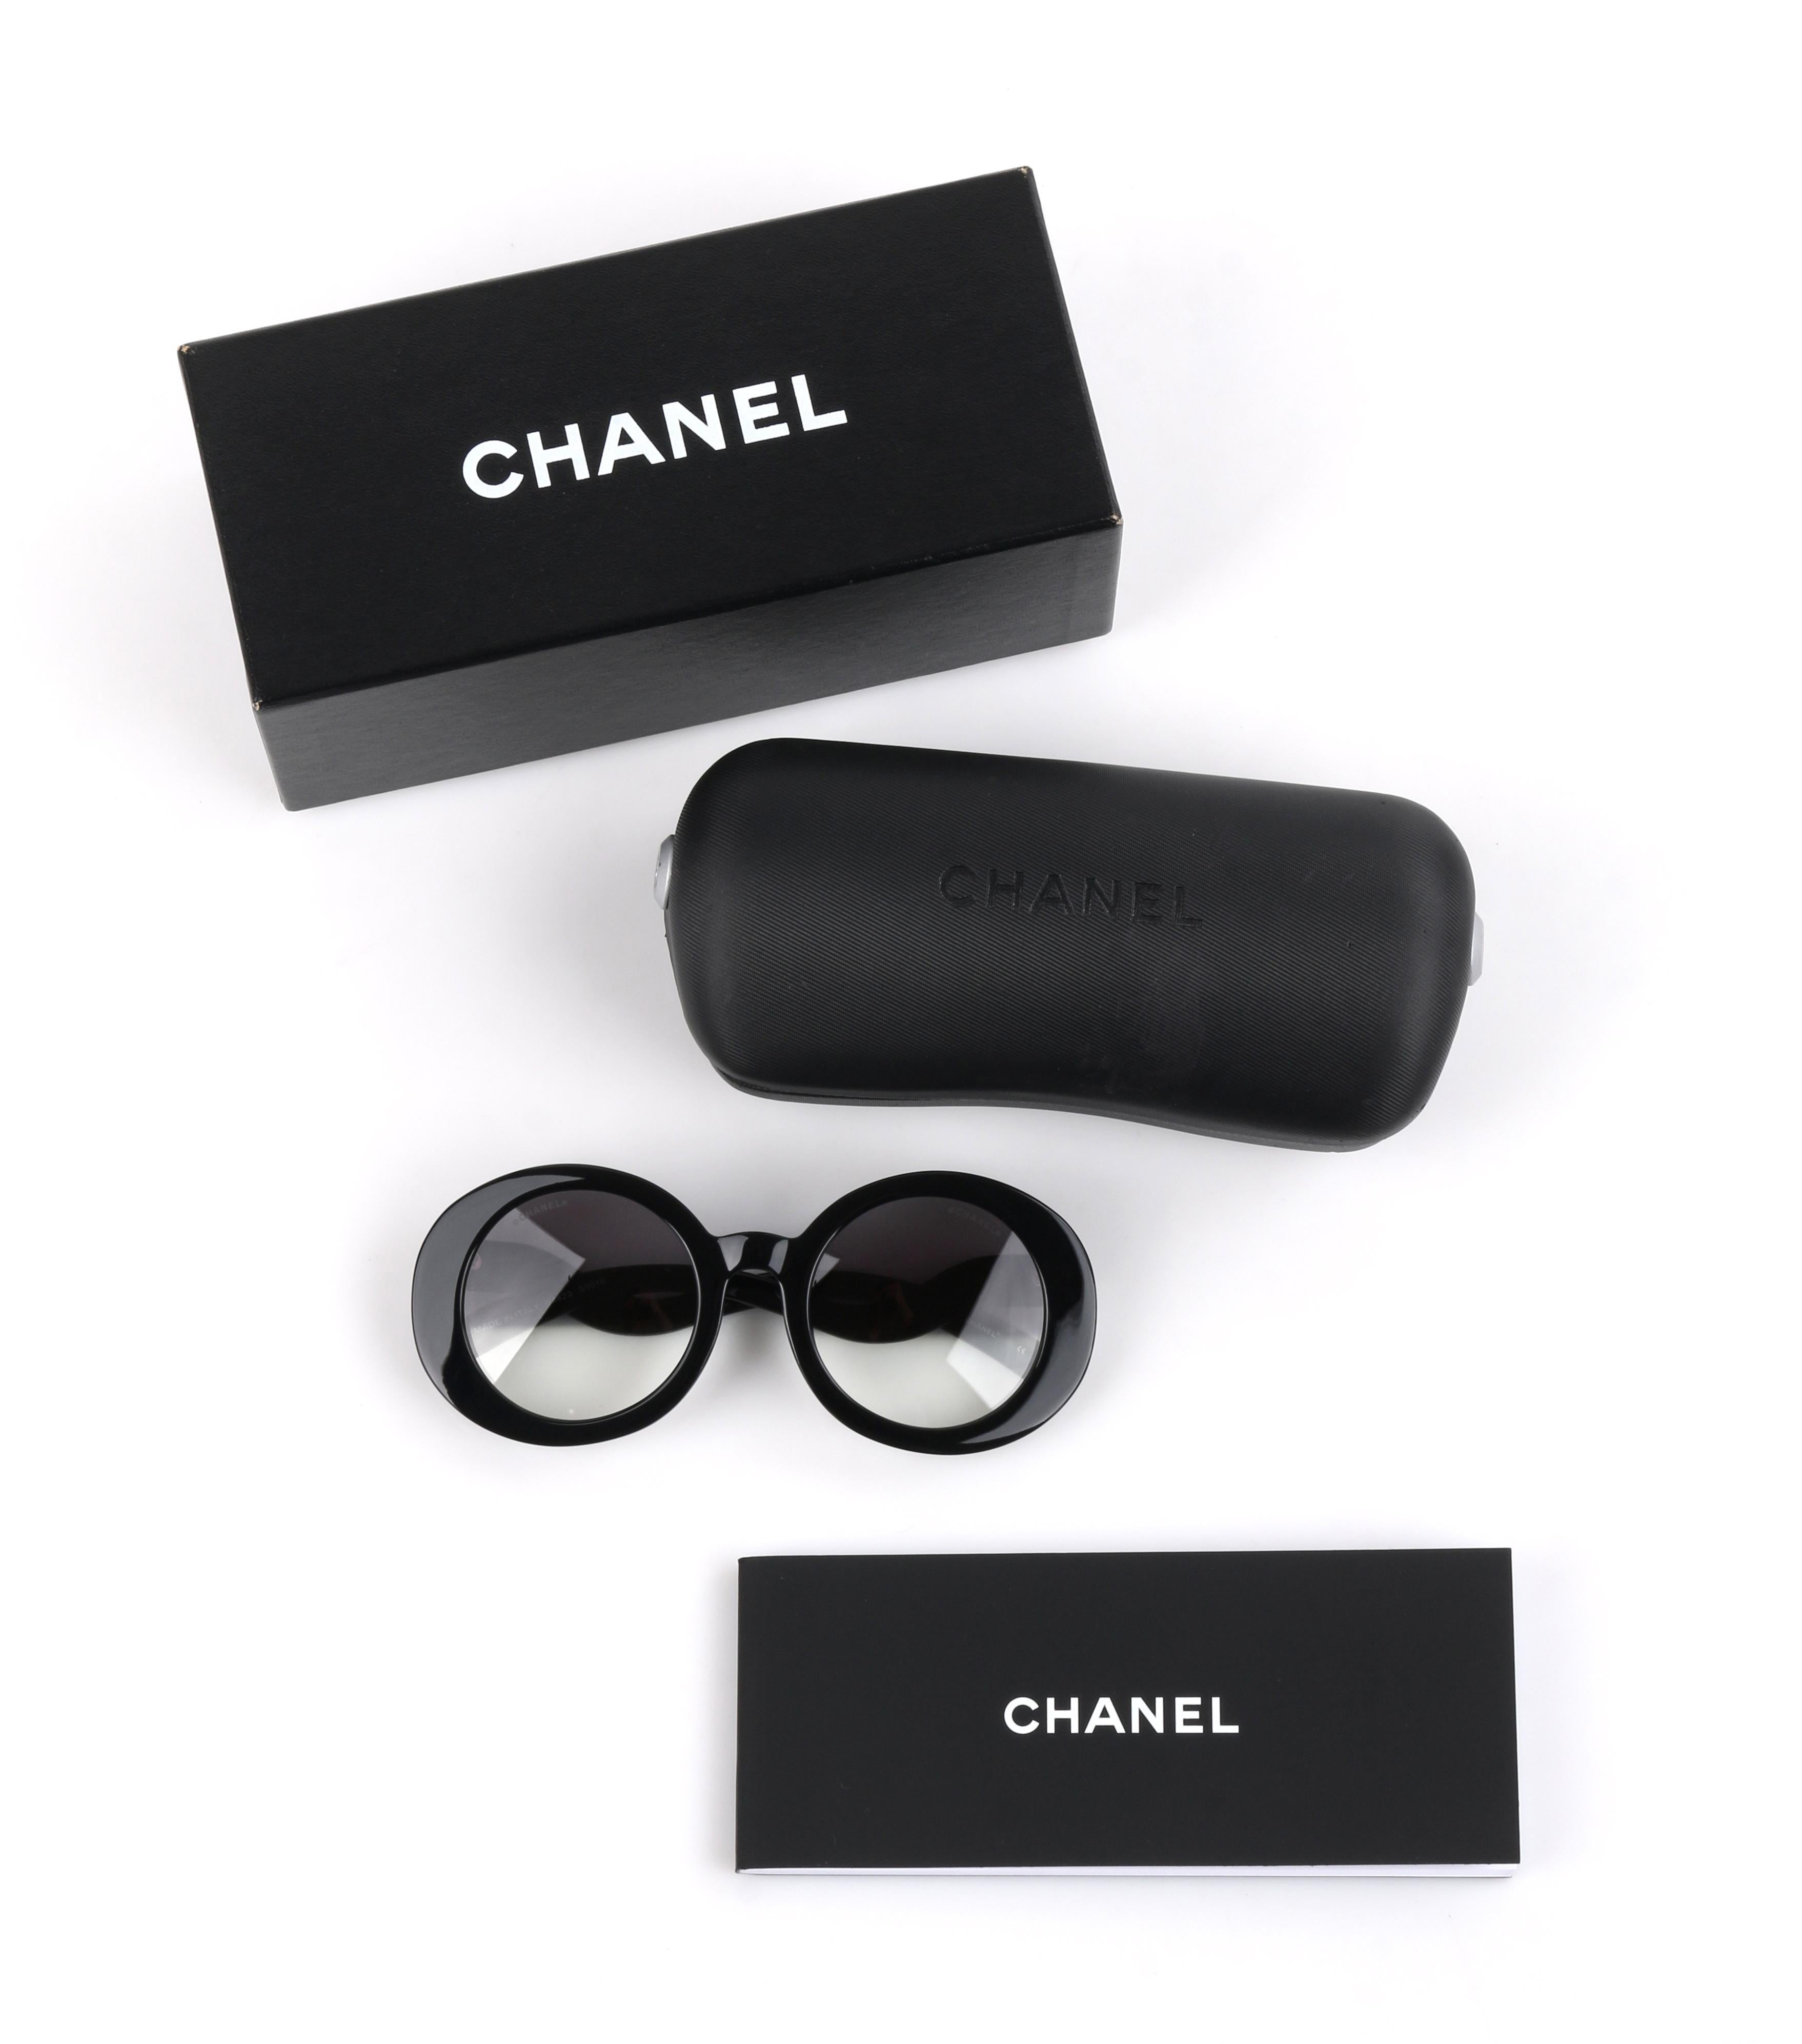 CHANEL S/S 2007 Black Round Half-Tint Sunglasses S5018
 
Brand / Manufacturer: Chanel 
Style: Sunglasses
Color(s): Black
Additional Details / Inclusions: Chanel S/S 2007 Iconic black round half-tint sunglasses. Black plastic frame; circle